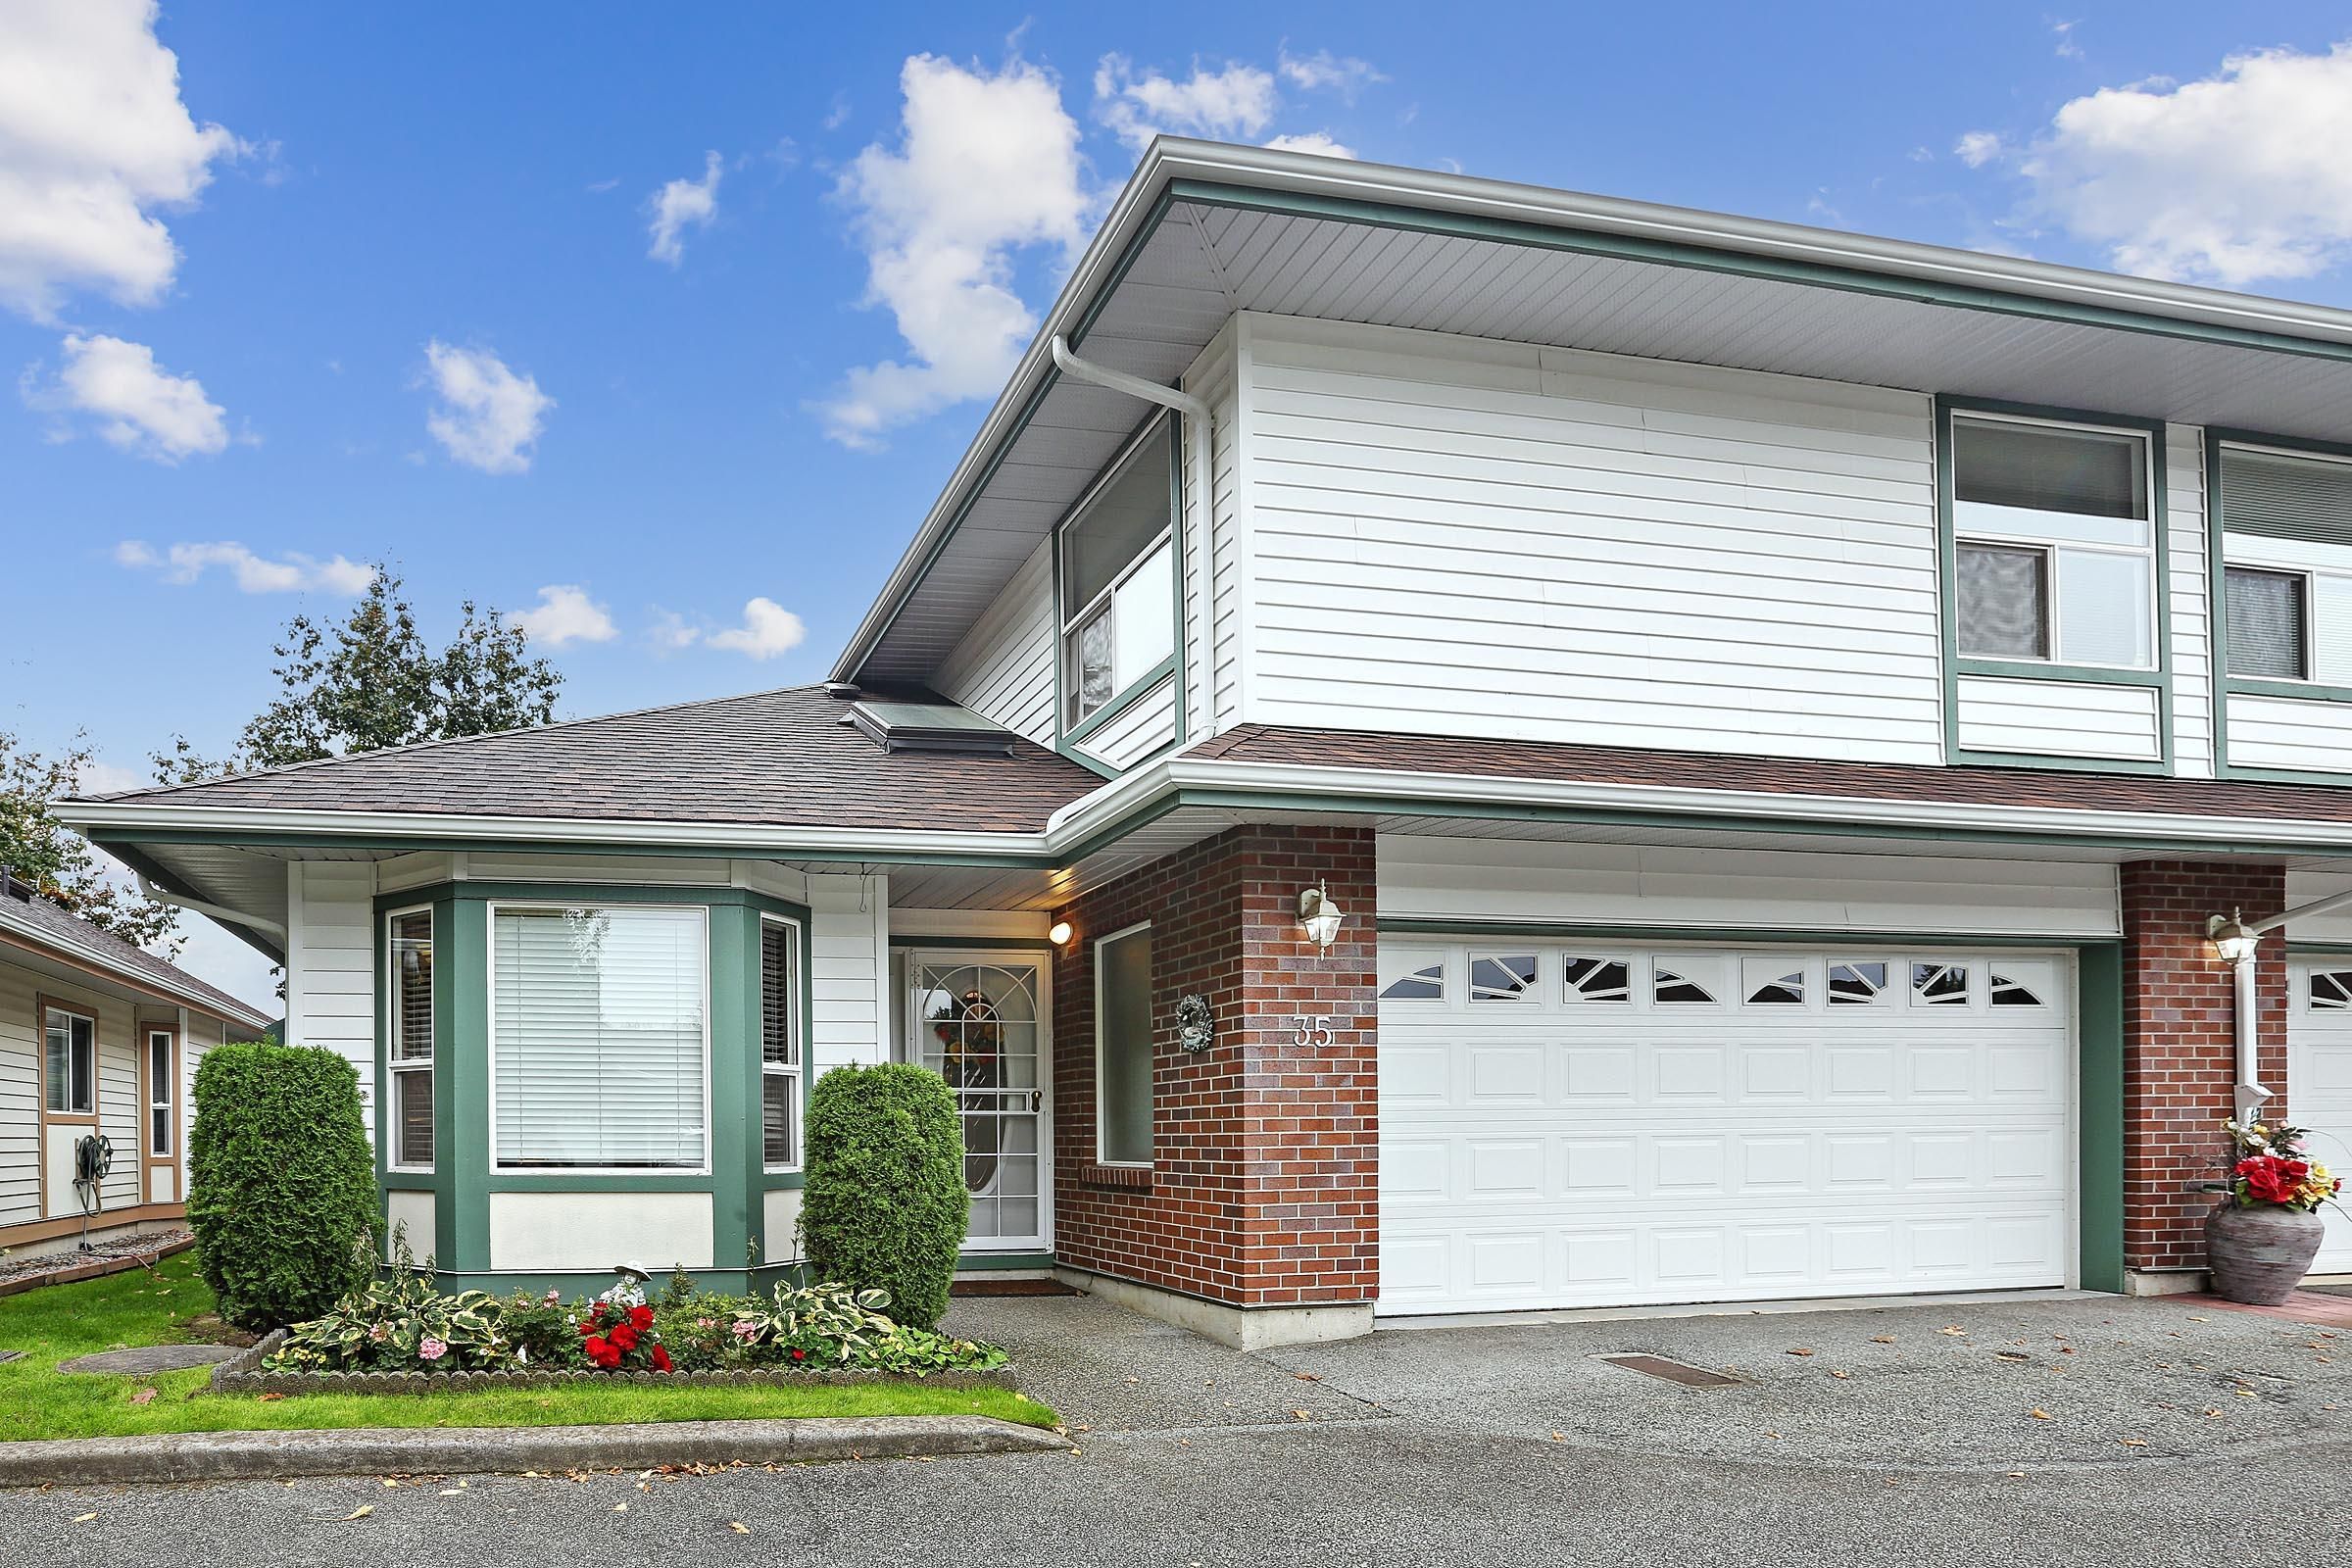 Main Photo: 35 18939 65 AVENUE in : Cloverdale BC Townhouse for sale : MLS®# R2616293